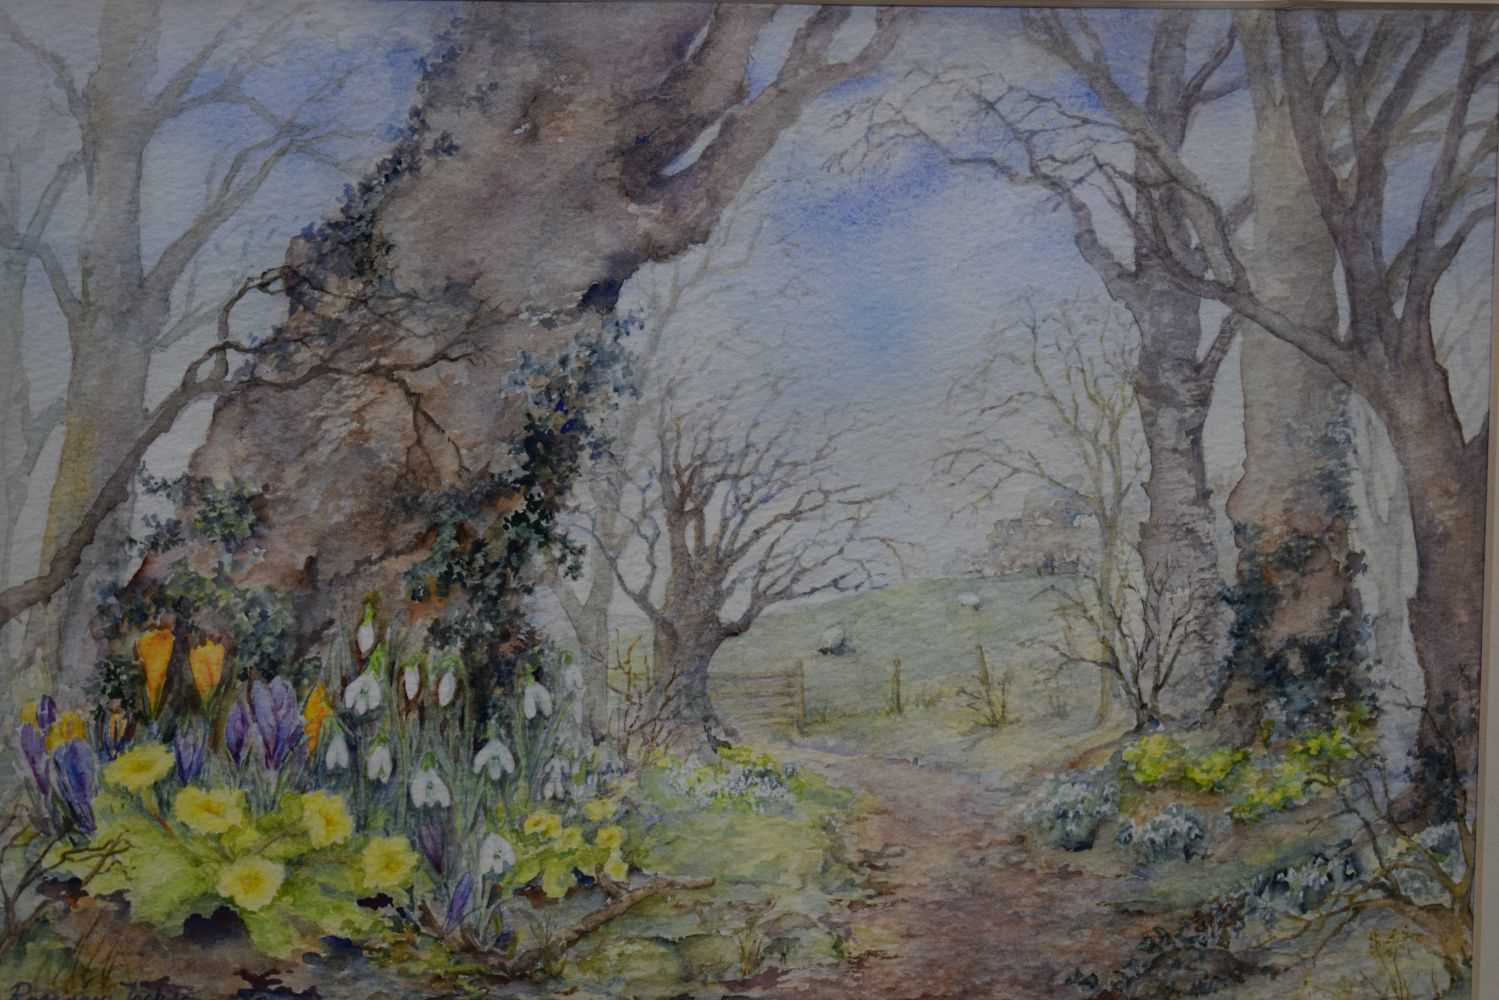 Rosemary Jackson (British) Framed watercolour "Path to the field gate in spring " 24 x 34 cm - Image 3 of 8